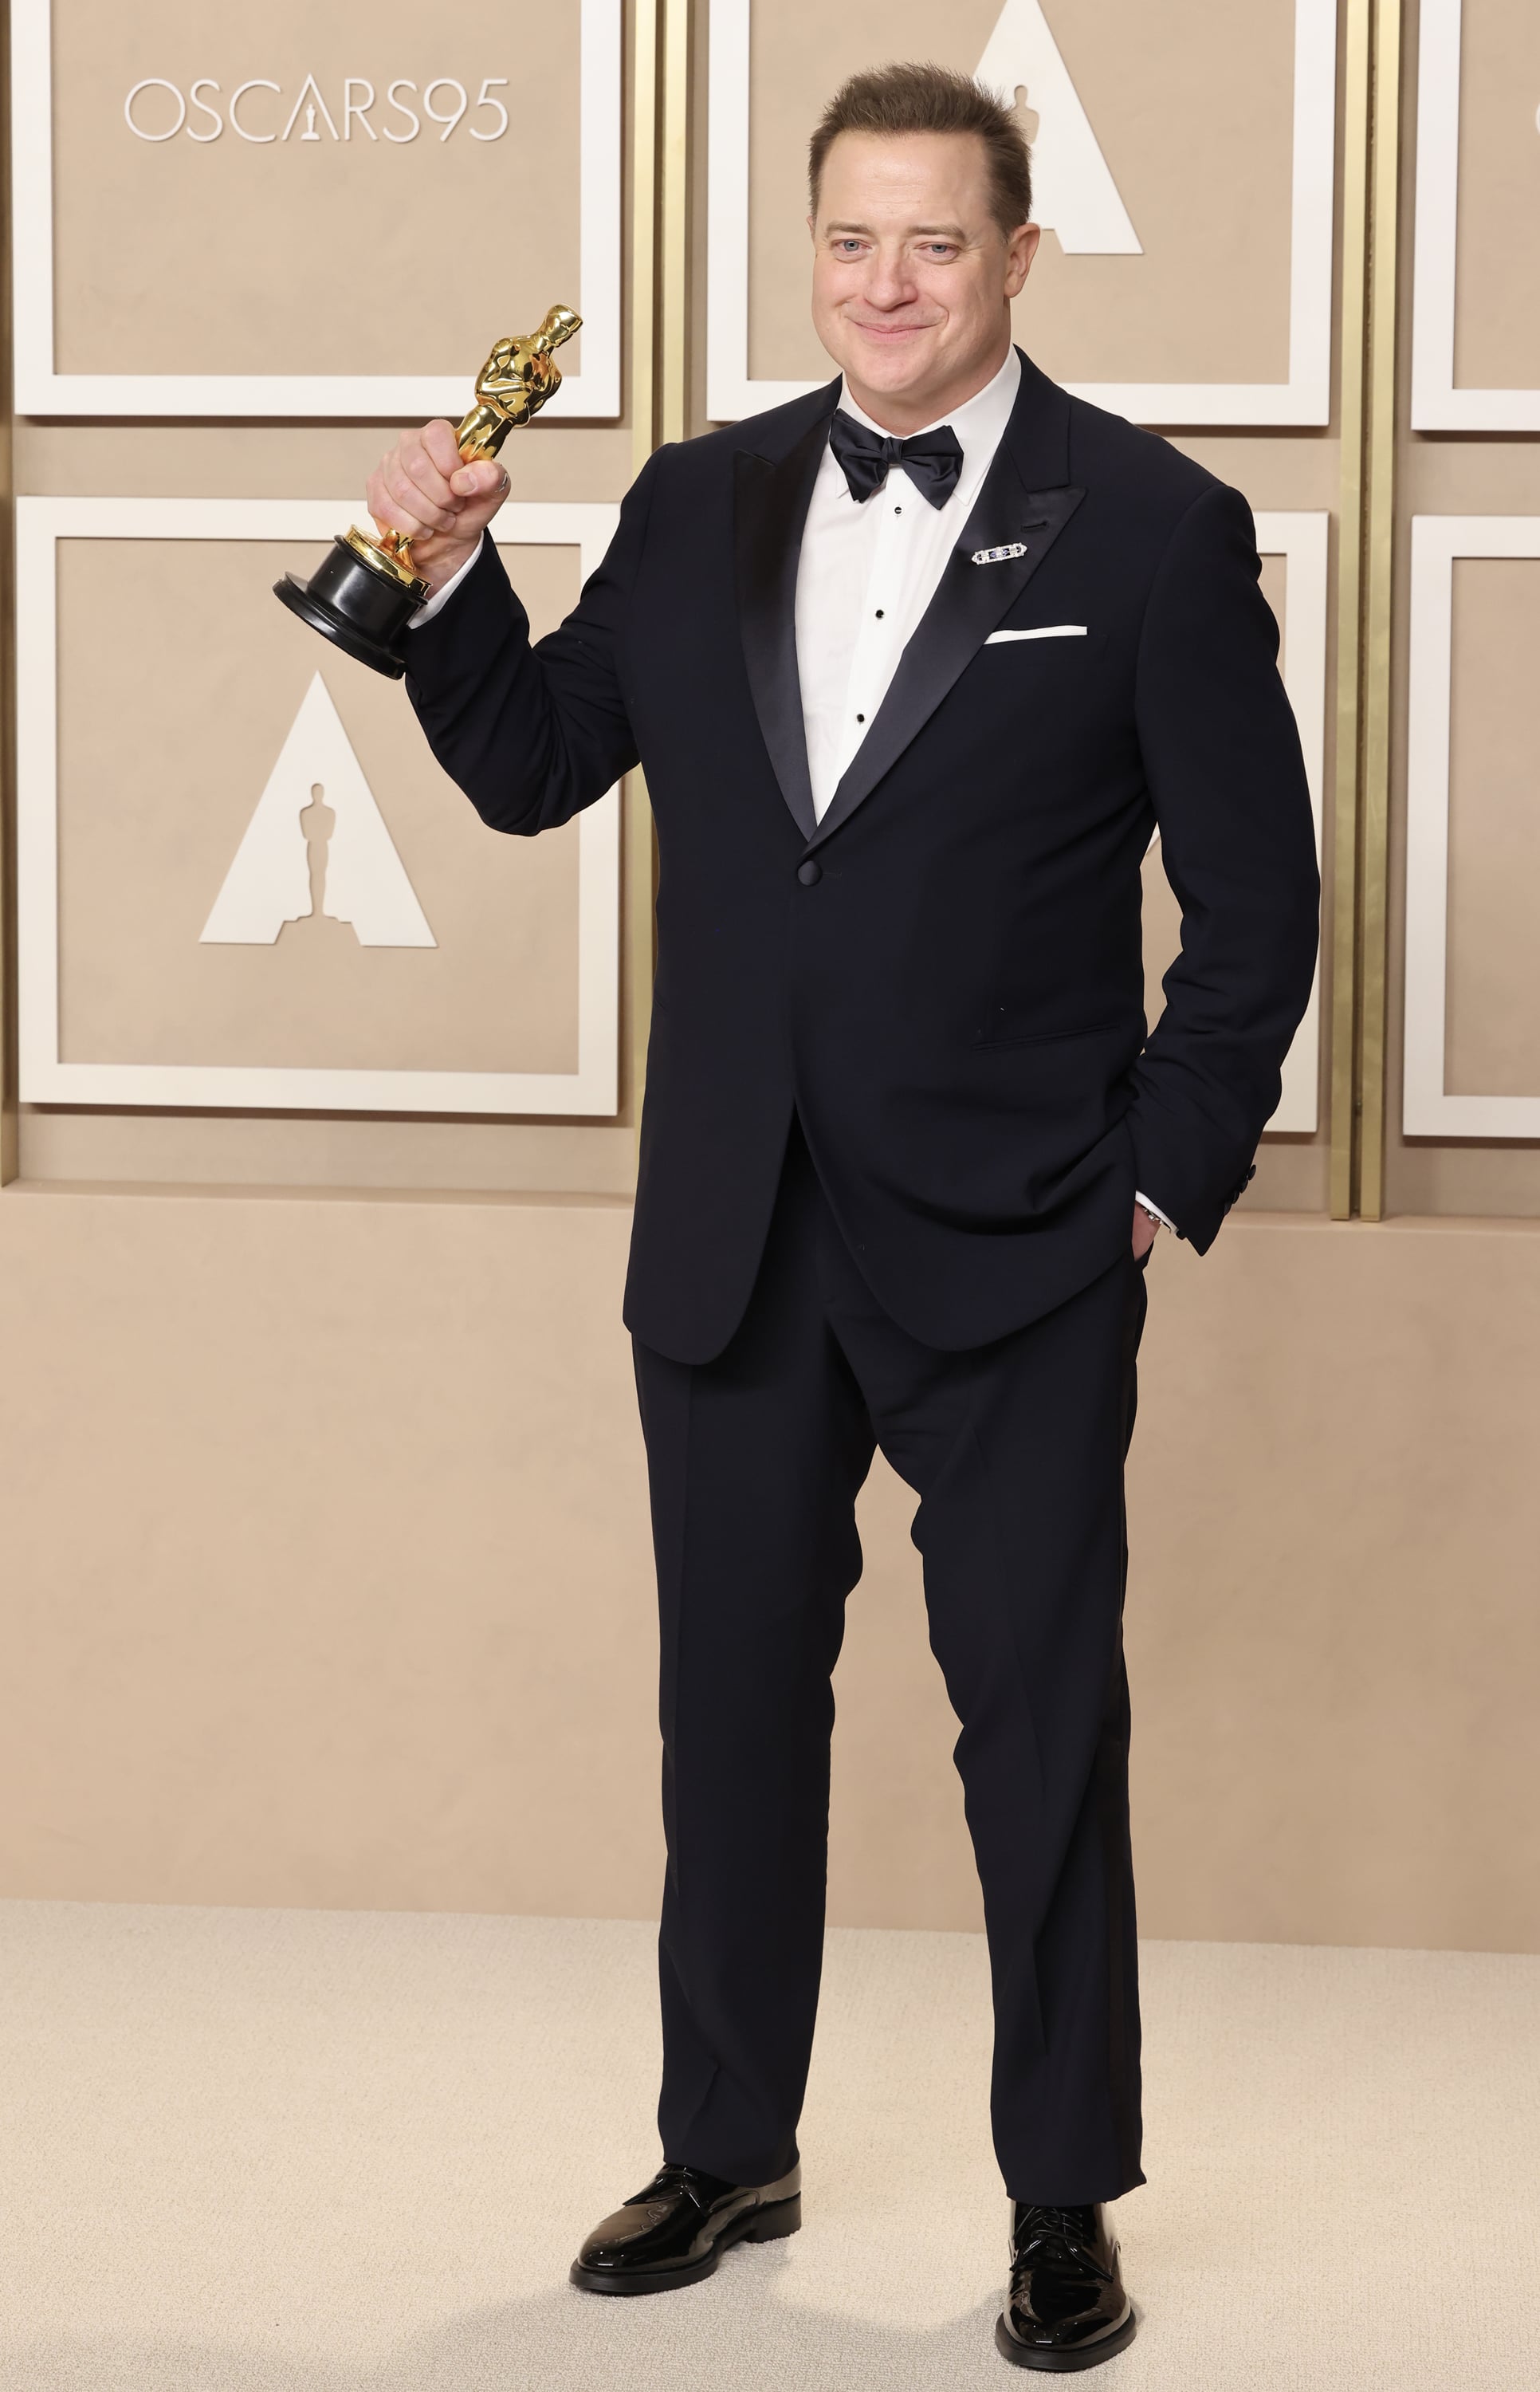 HOLLYWOOD, CALIFORNIA - MARCH 12: Brendan Fraser, winner of the Best Actor in a Leading Role award for 'The Whale', poses in the press room during the 95th Annual Academy Awards at Ovation Hollywood on March 12, 2023 in Hollywood, California. (Photo by Rodin Eckenroth/Getty Images)